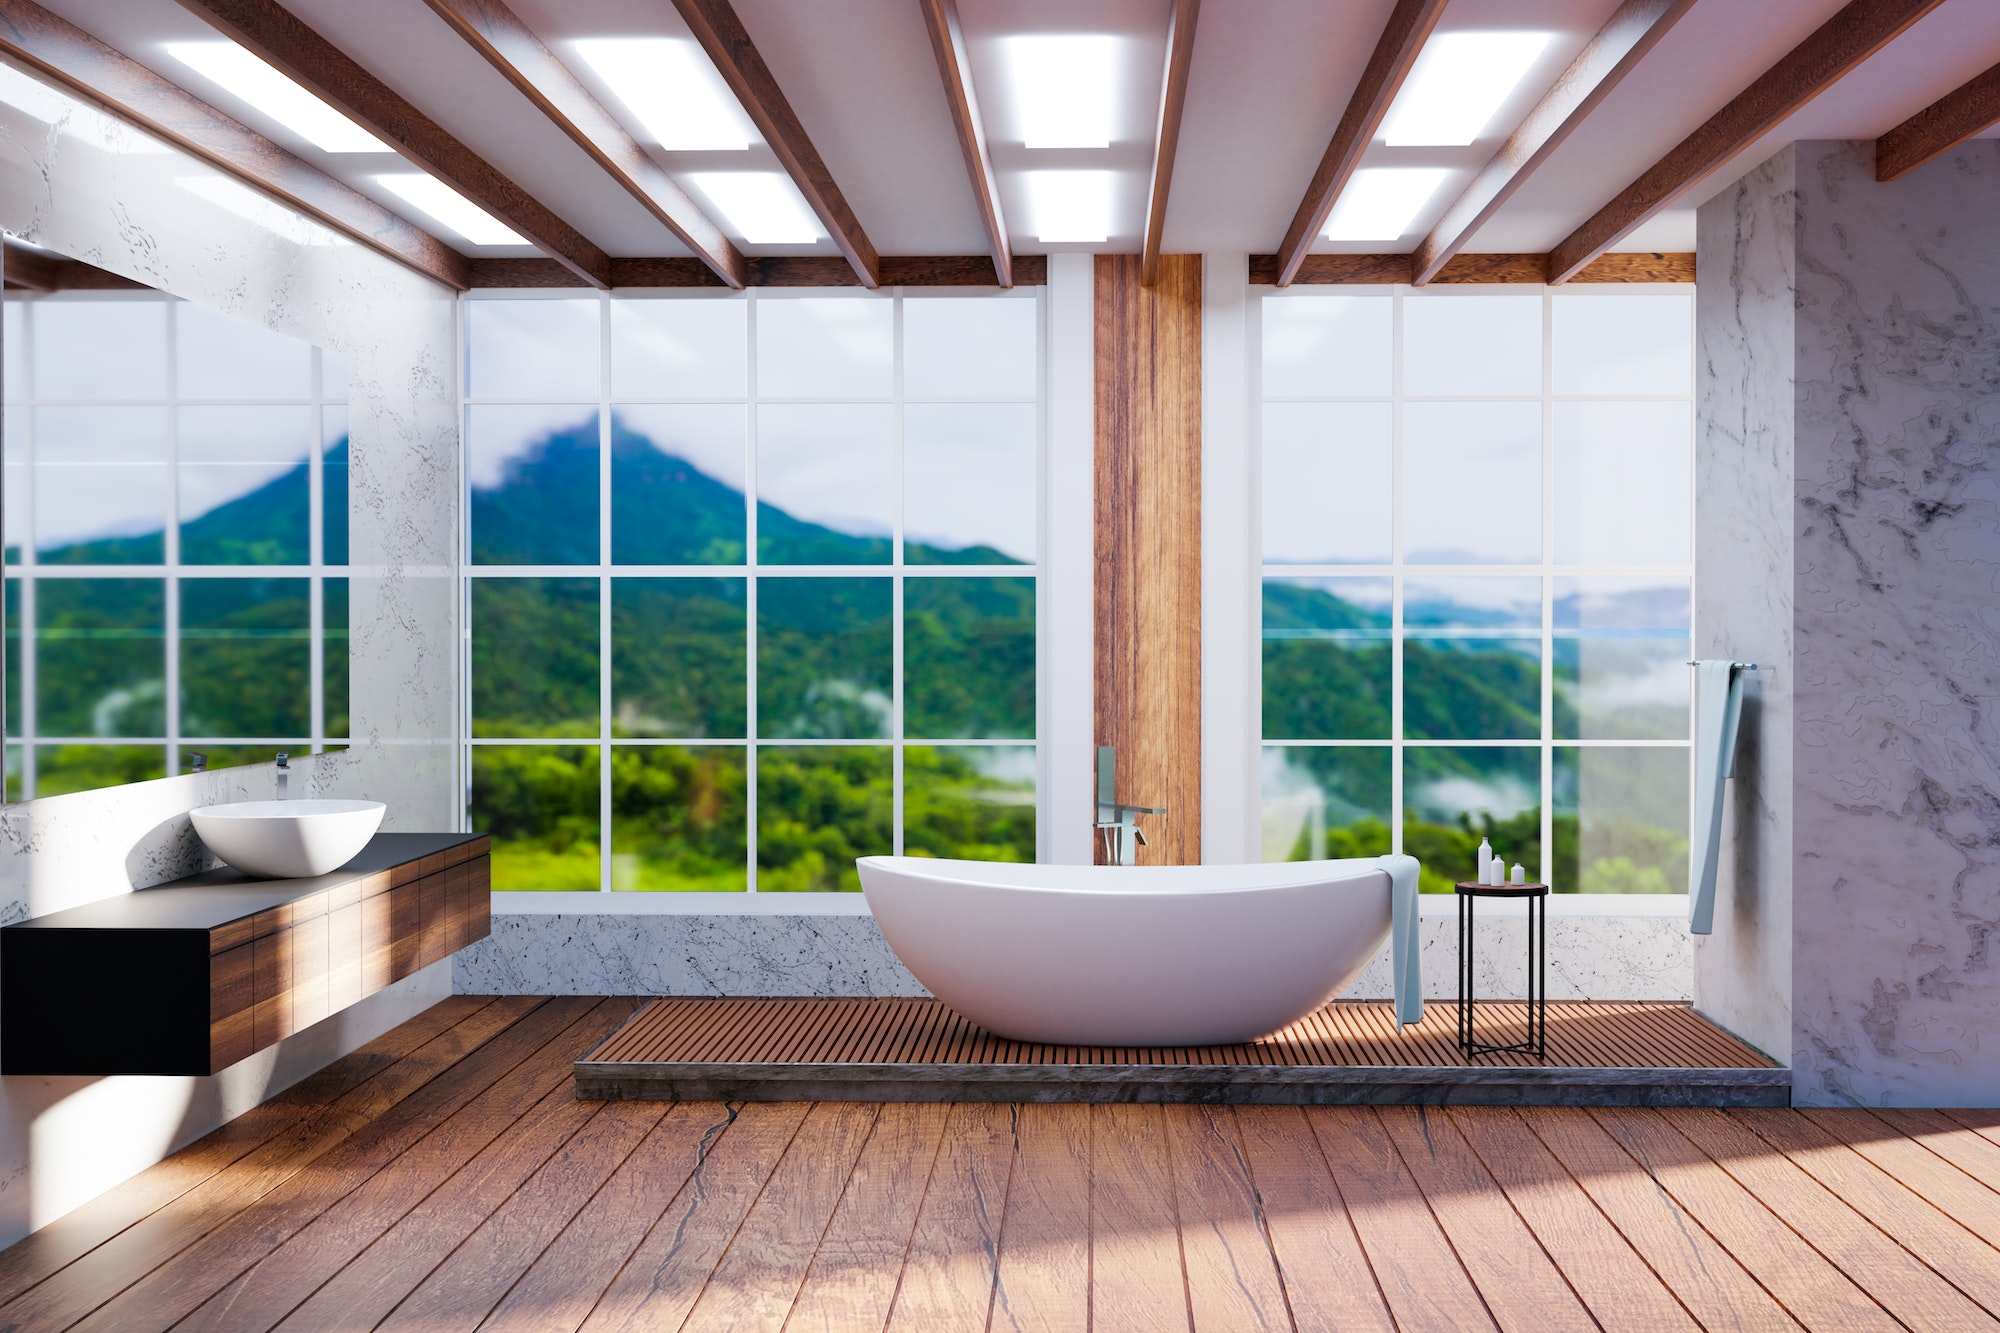 luxury toilet design with wide angle view, 3d illustration rendering